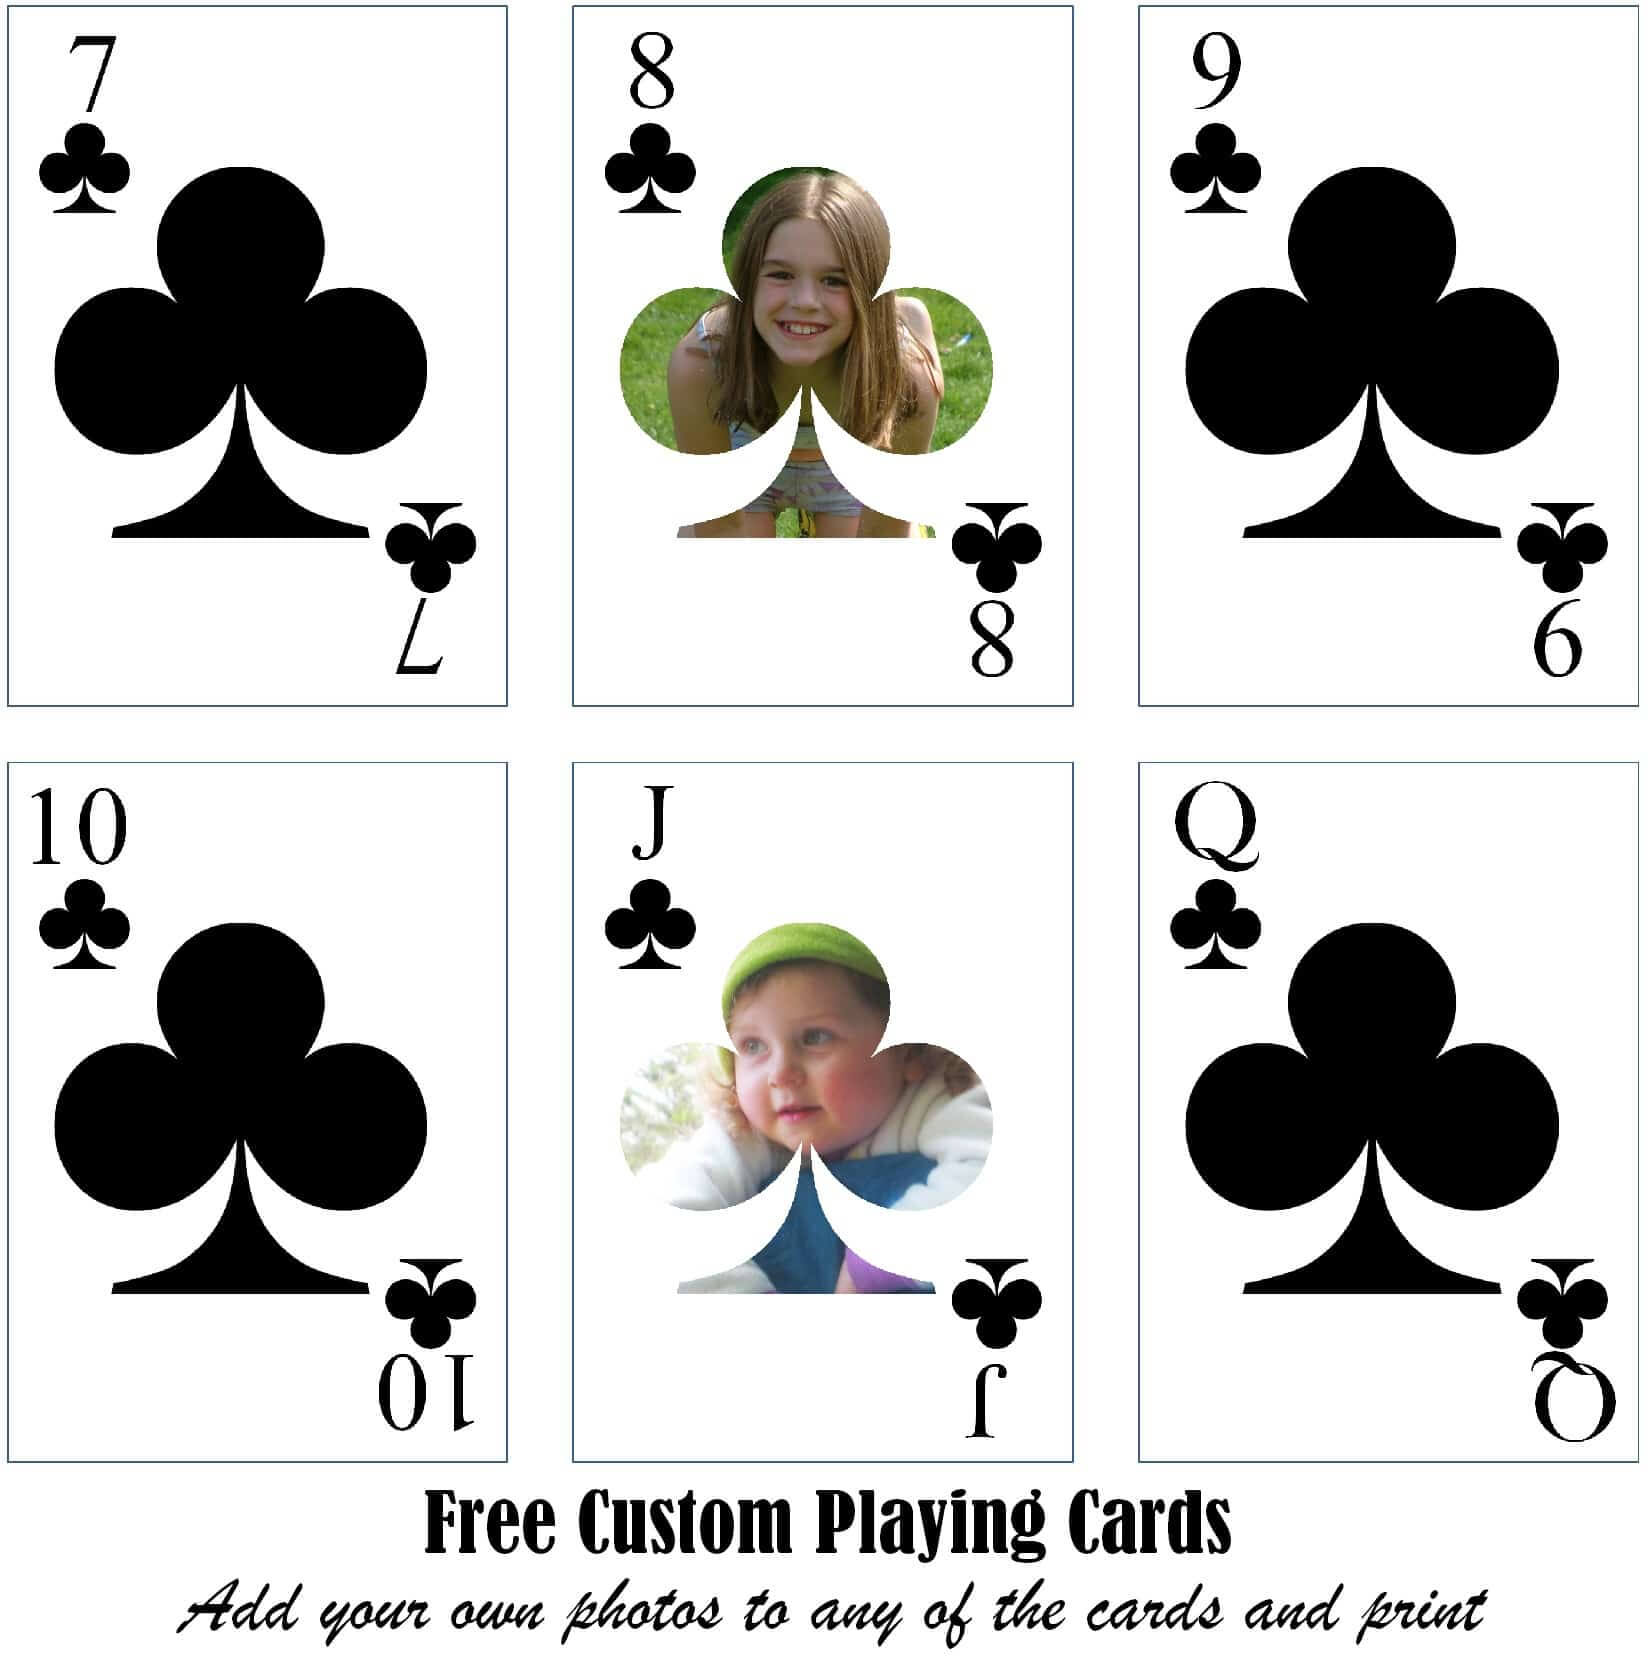 free-printable-custom-playing-cards-add-your-photo-and-or-text-inside